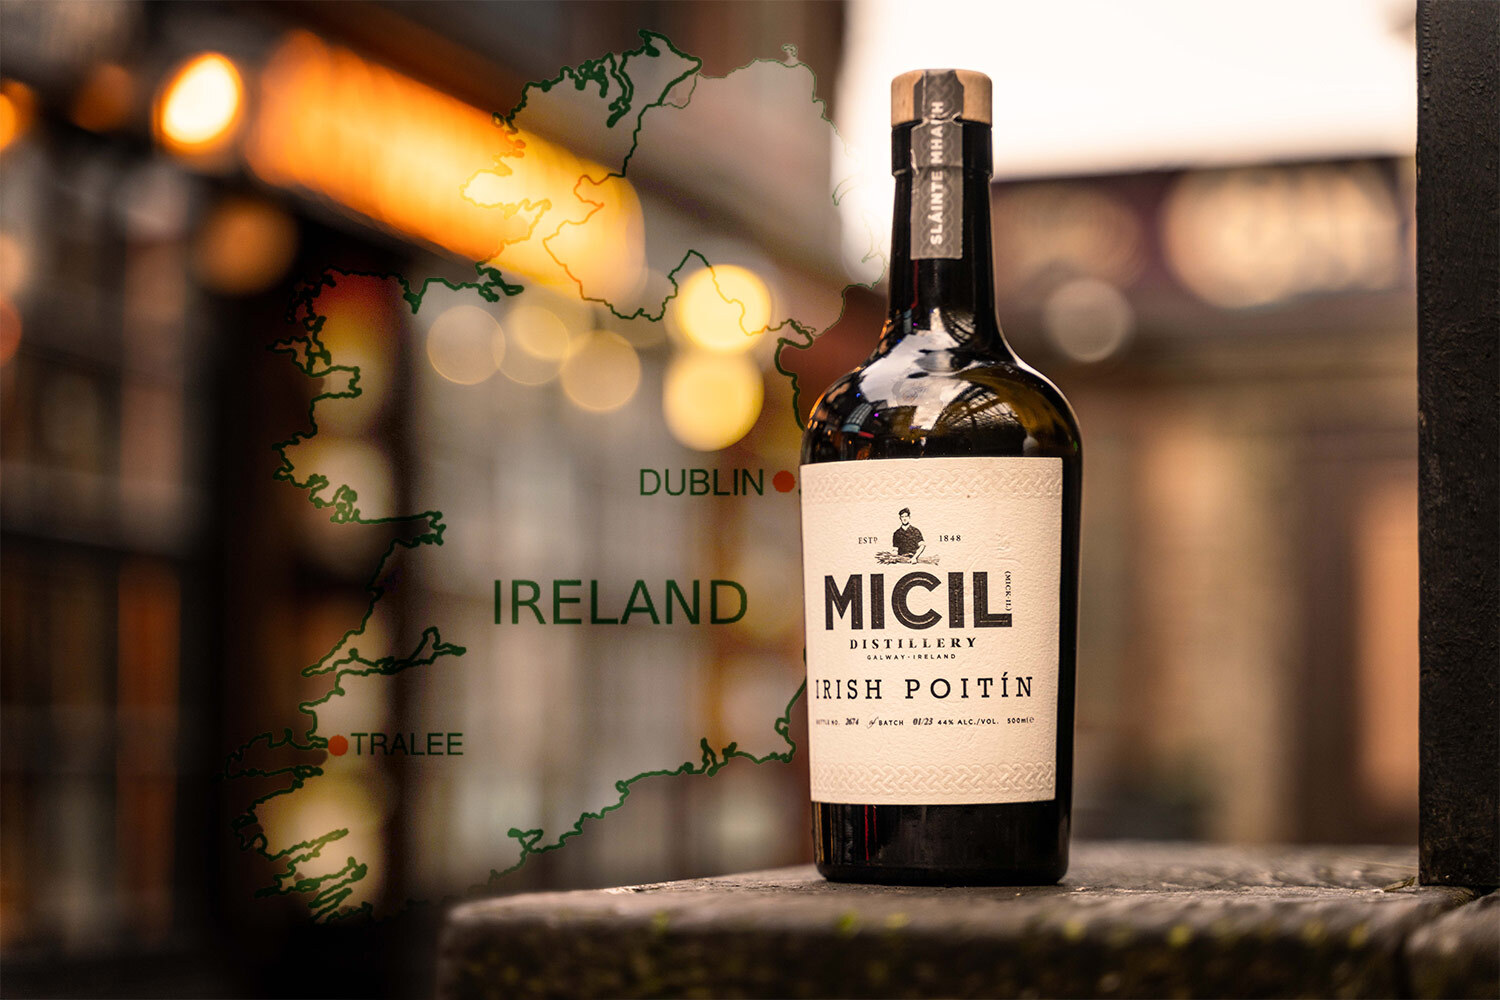 A bottle of Micil Poitín against a blurry background and a map of Ireland